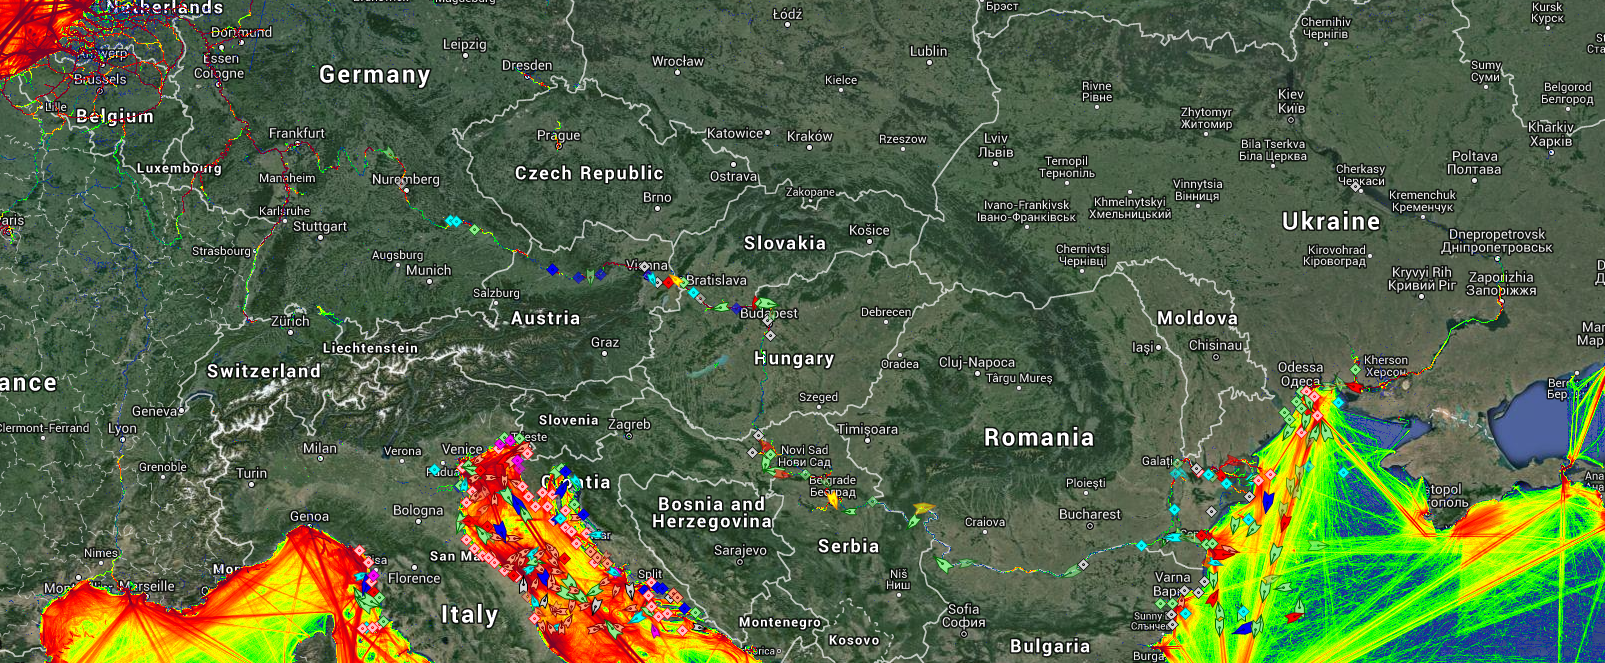 Live Marine Traffic, Density Map and Current Position of ships in DANUBE RIVER